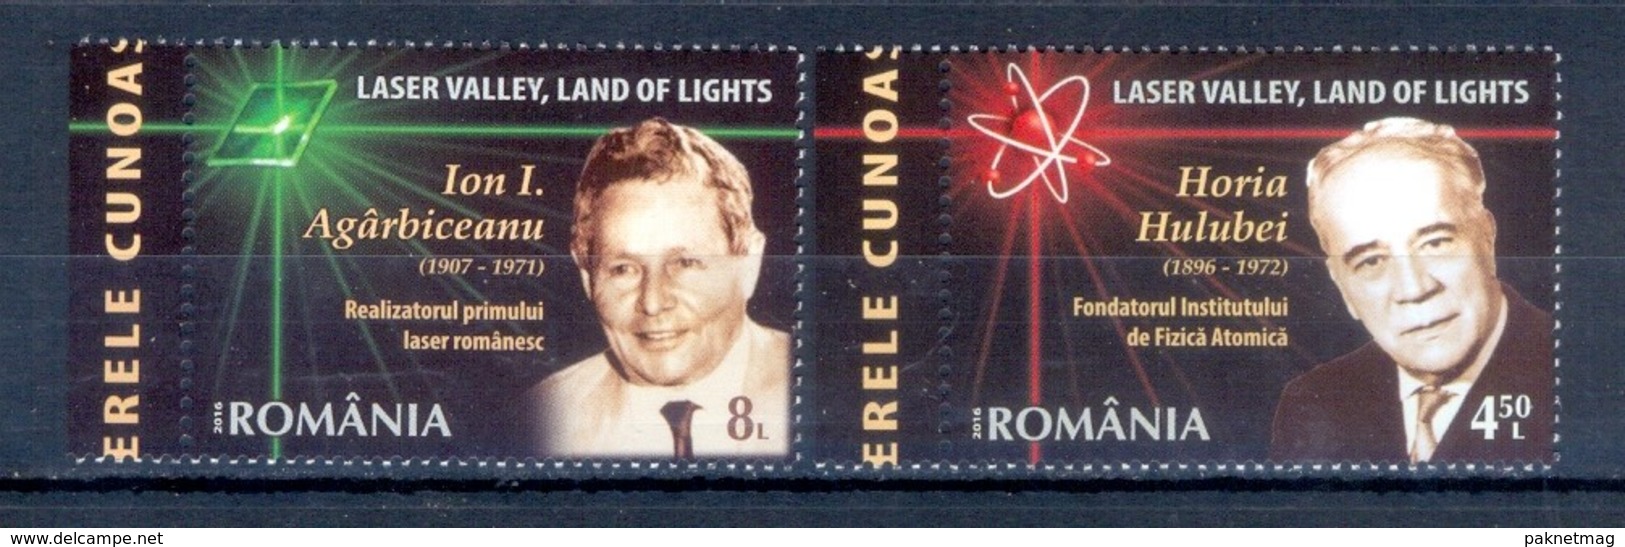 G72- Romania 2016 Beyond The Frontiers Of Knowledge, Laser Valley Land Of Lights. - Unused Stamps